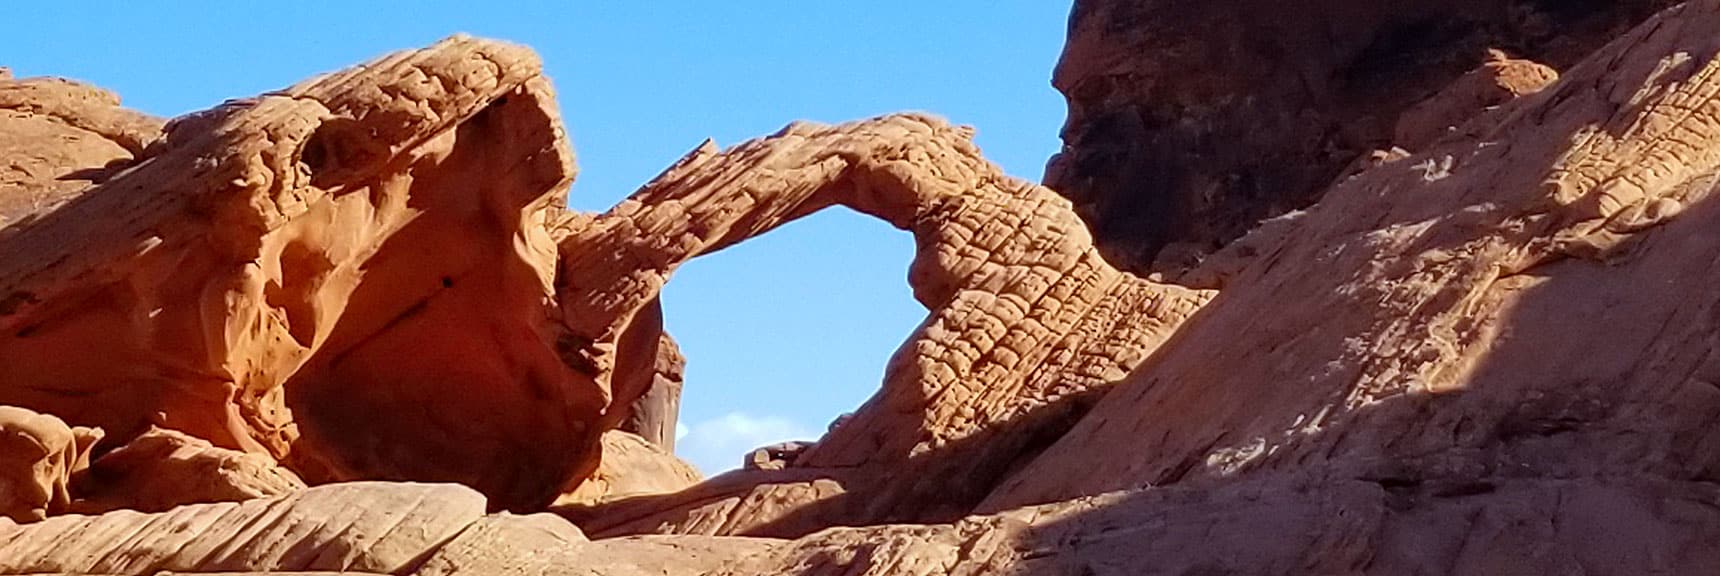 Arch Rock in Valley of Fire State Park, Nevada